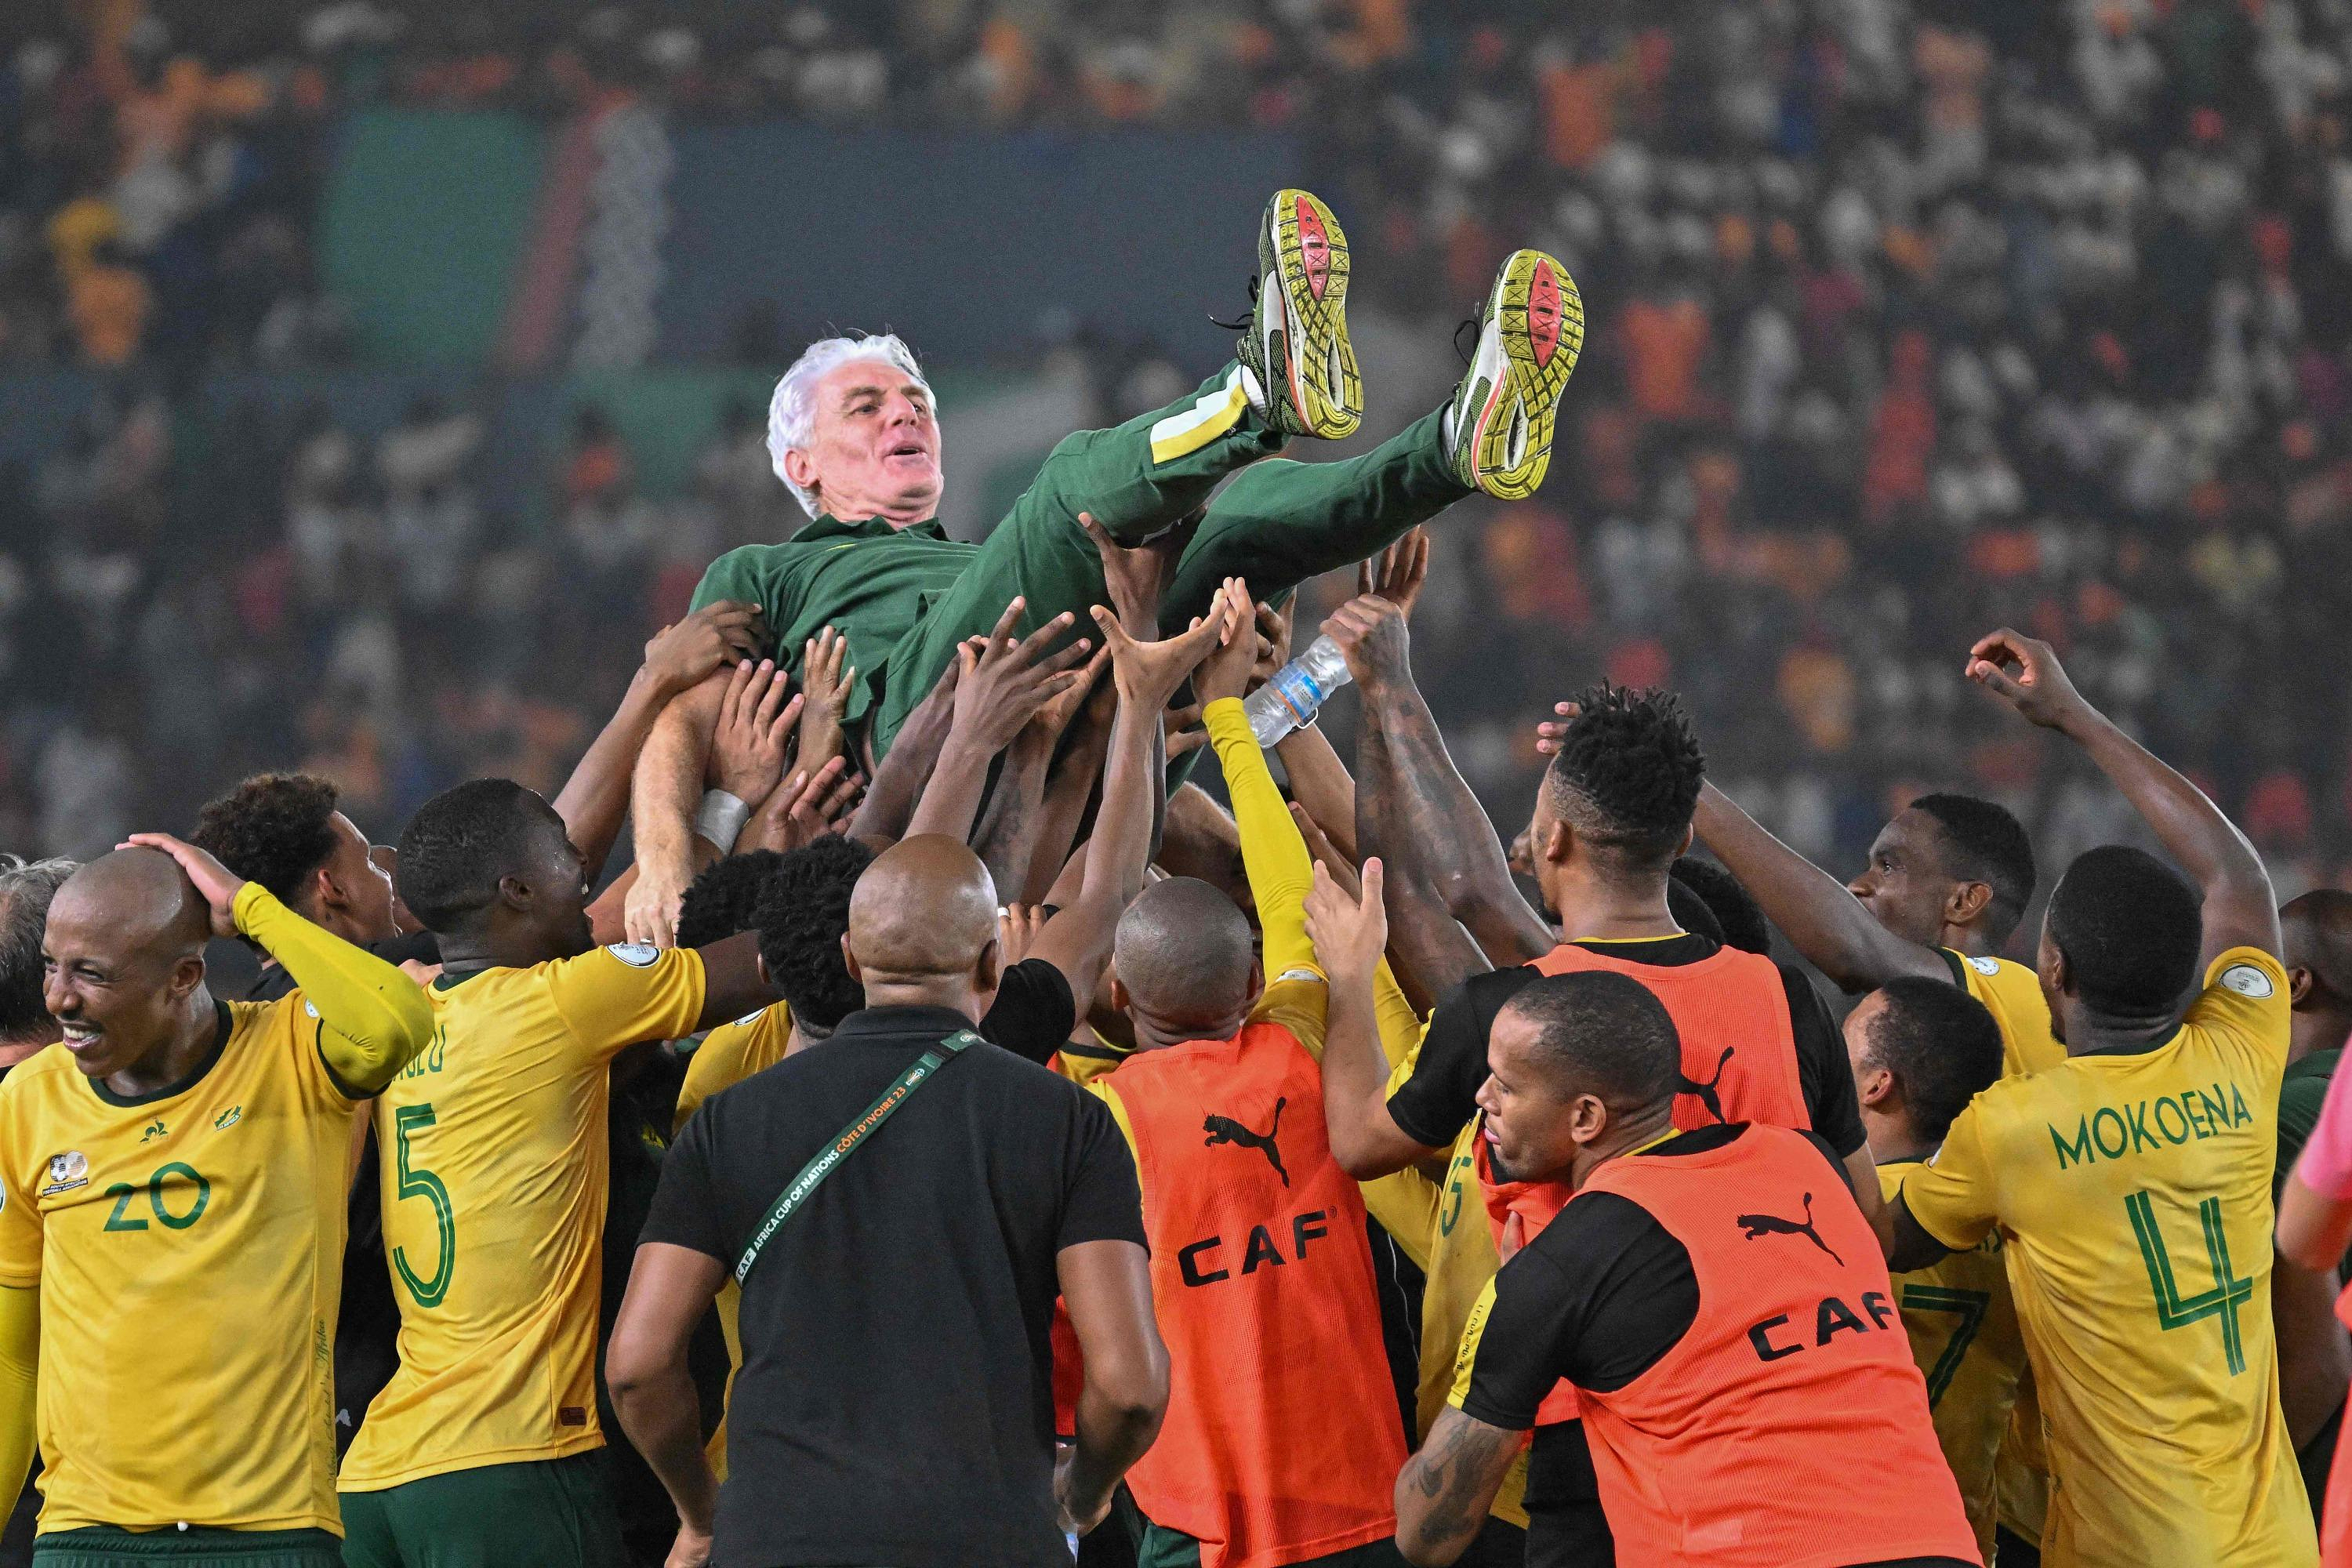 CAN: South Africa wins the small final